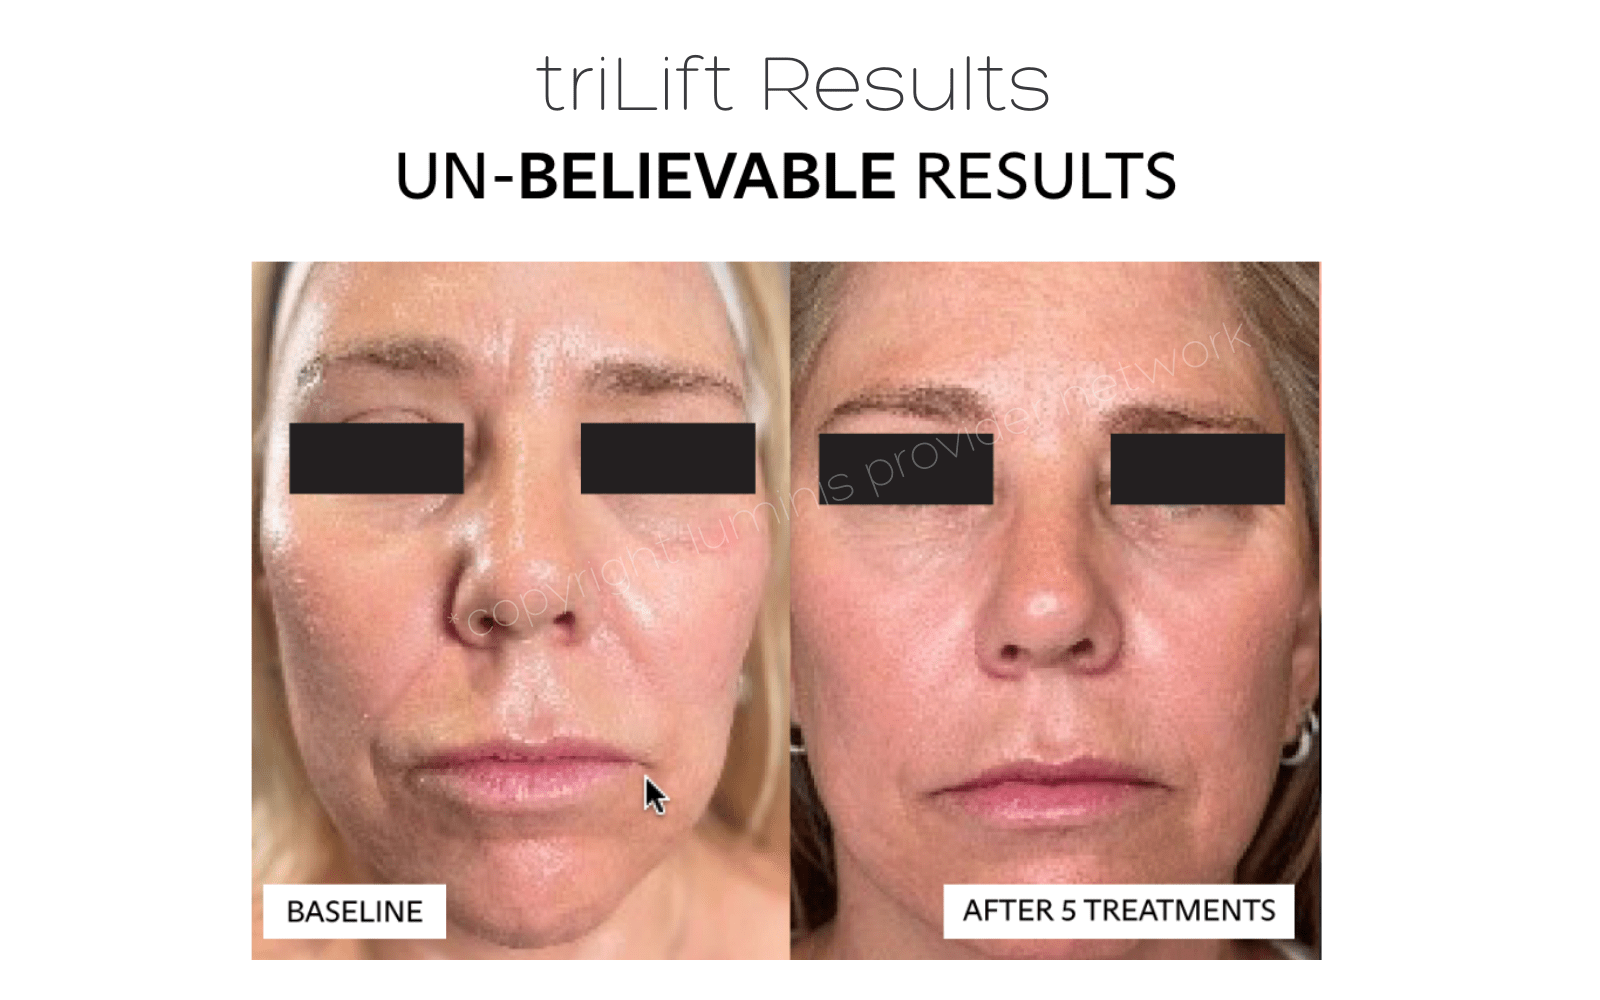 triLift results before and after 5 treatments for facial sagging - Lumenis Provider Network.